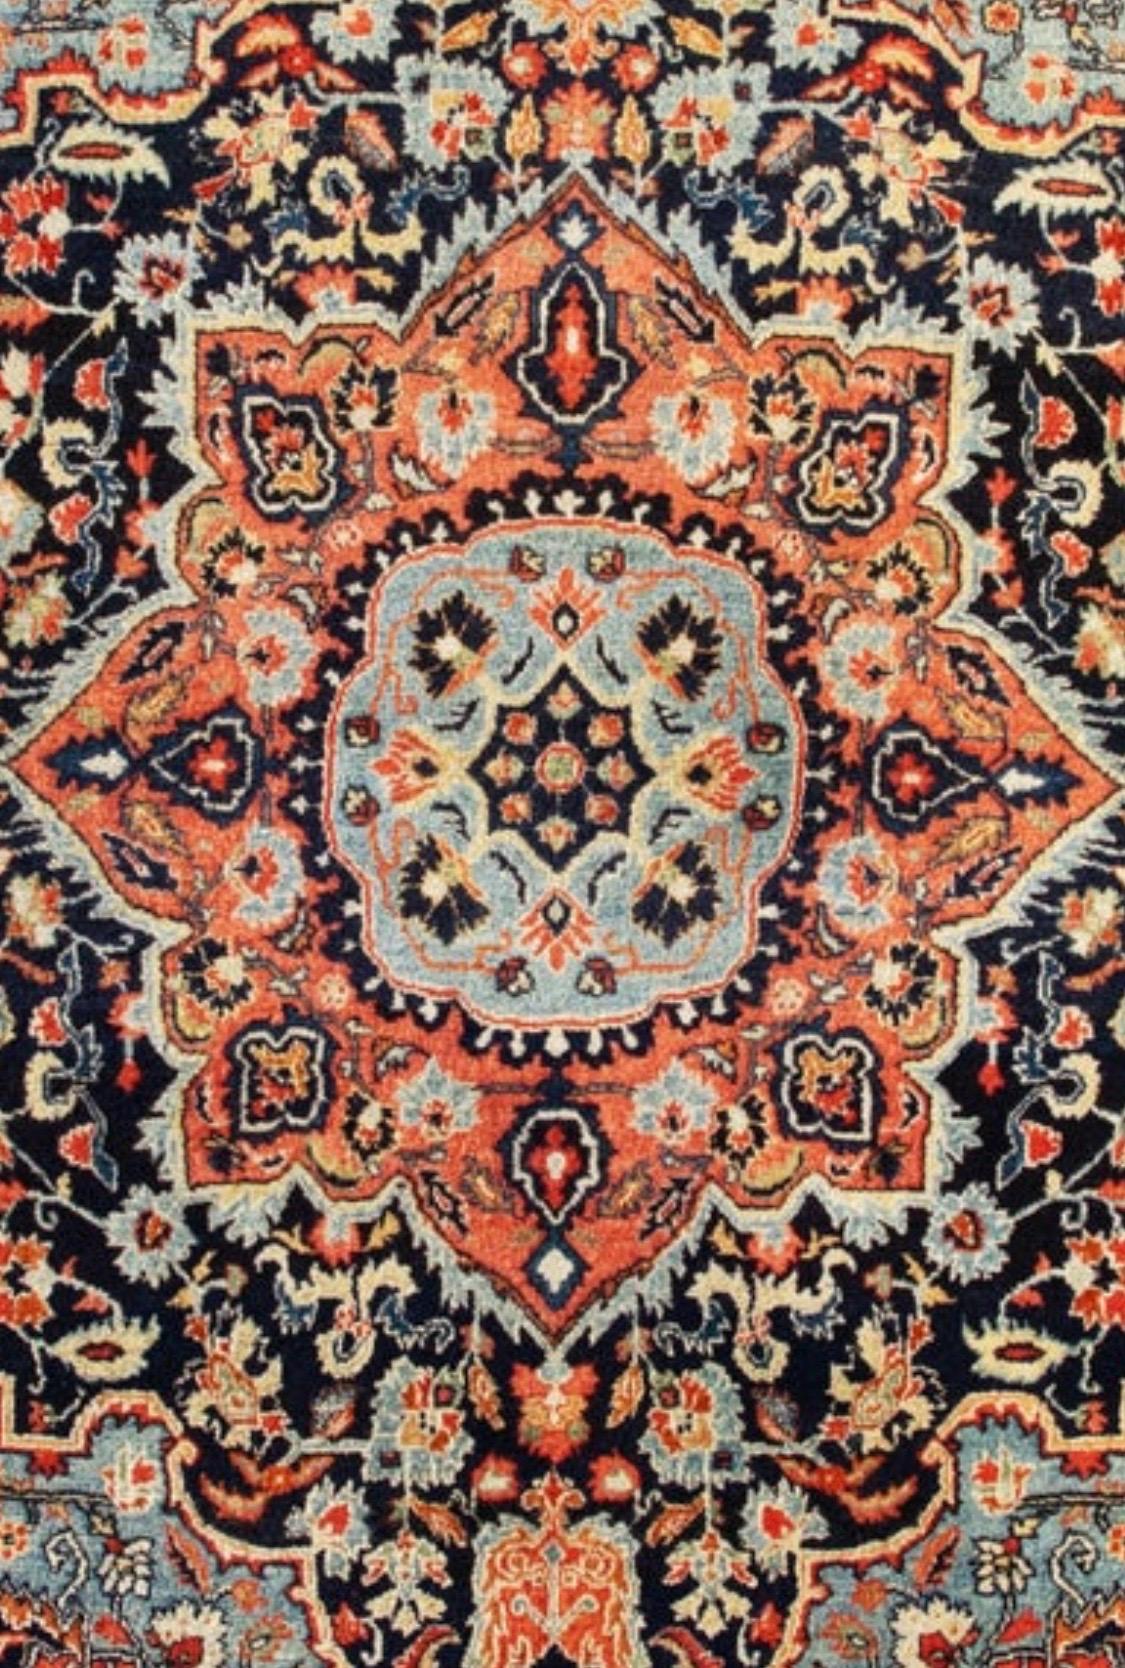 This is a fine example of a lovely antique Farahan Sarouk dating from the 1930s measuring 3.9 x 5.1 ft.

This piece is a pair with rug #4957 in our collection.

Persian Farahan Sarouk rugs were woven in the village of Sarouk but these carpets